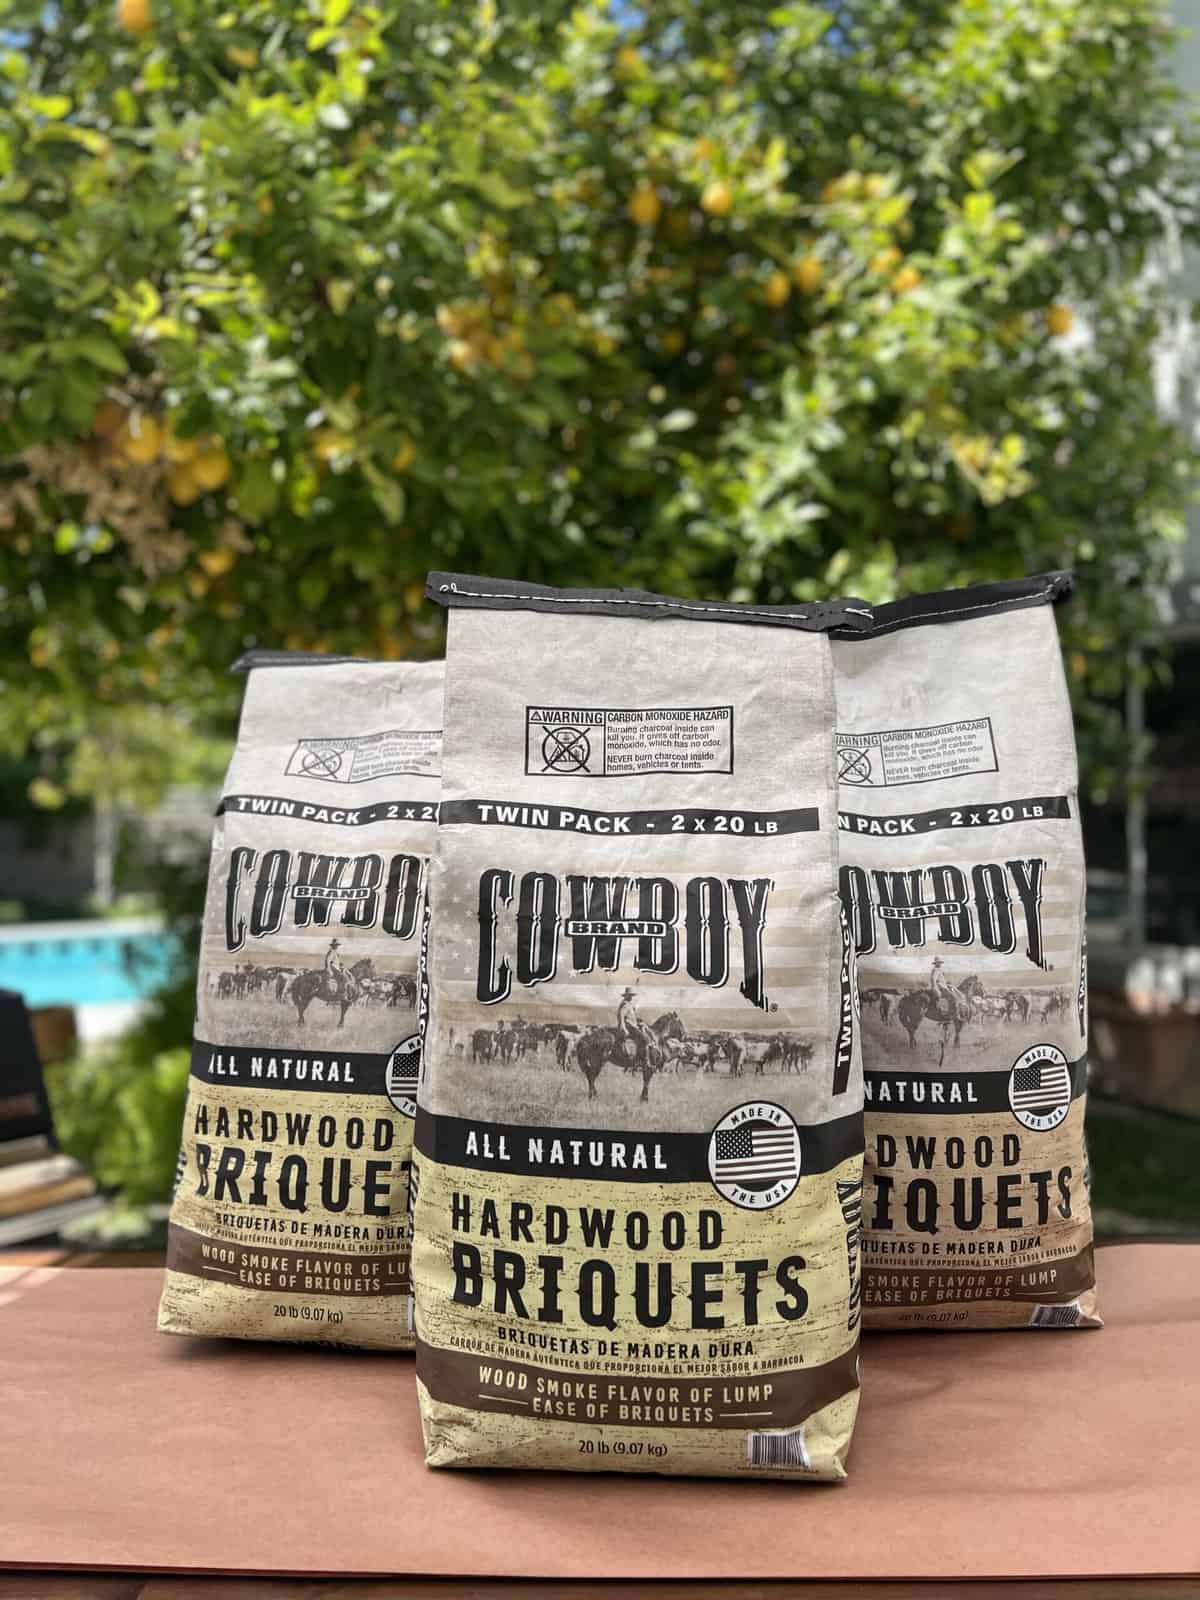 Cowboy brand charcoal on a table, perfect for smoking turkey.